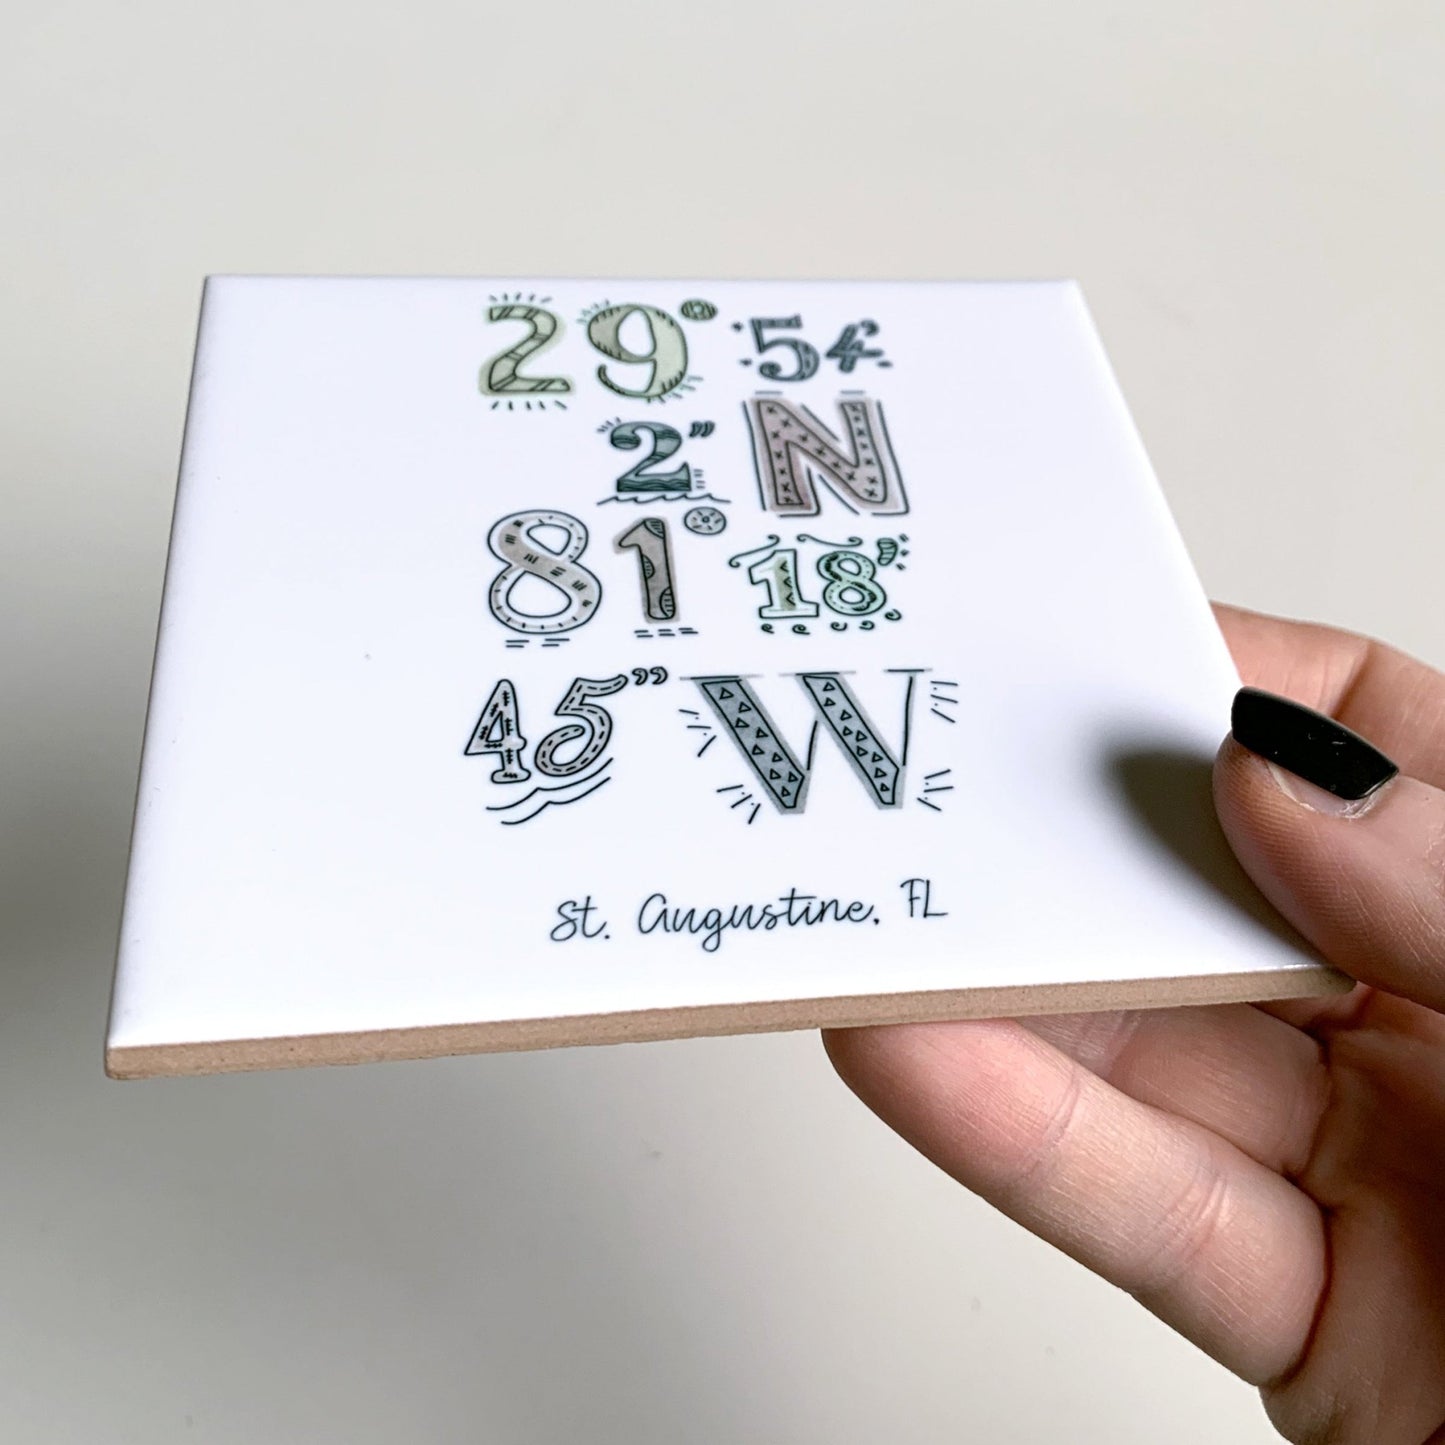 Custom City Art Coasters - Watercolor Coordinates Drawing For Your Hometown (Set of 4)